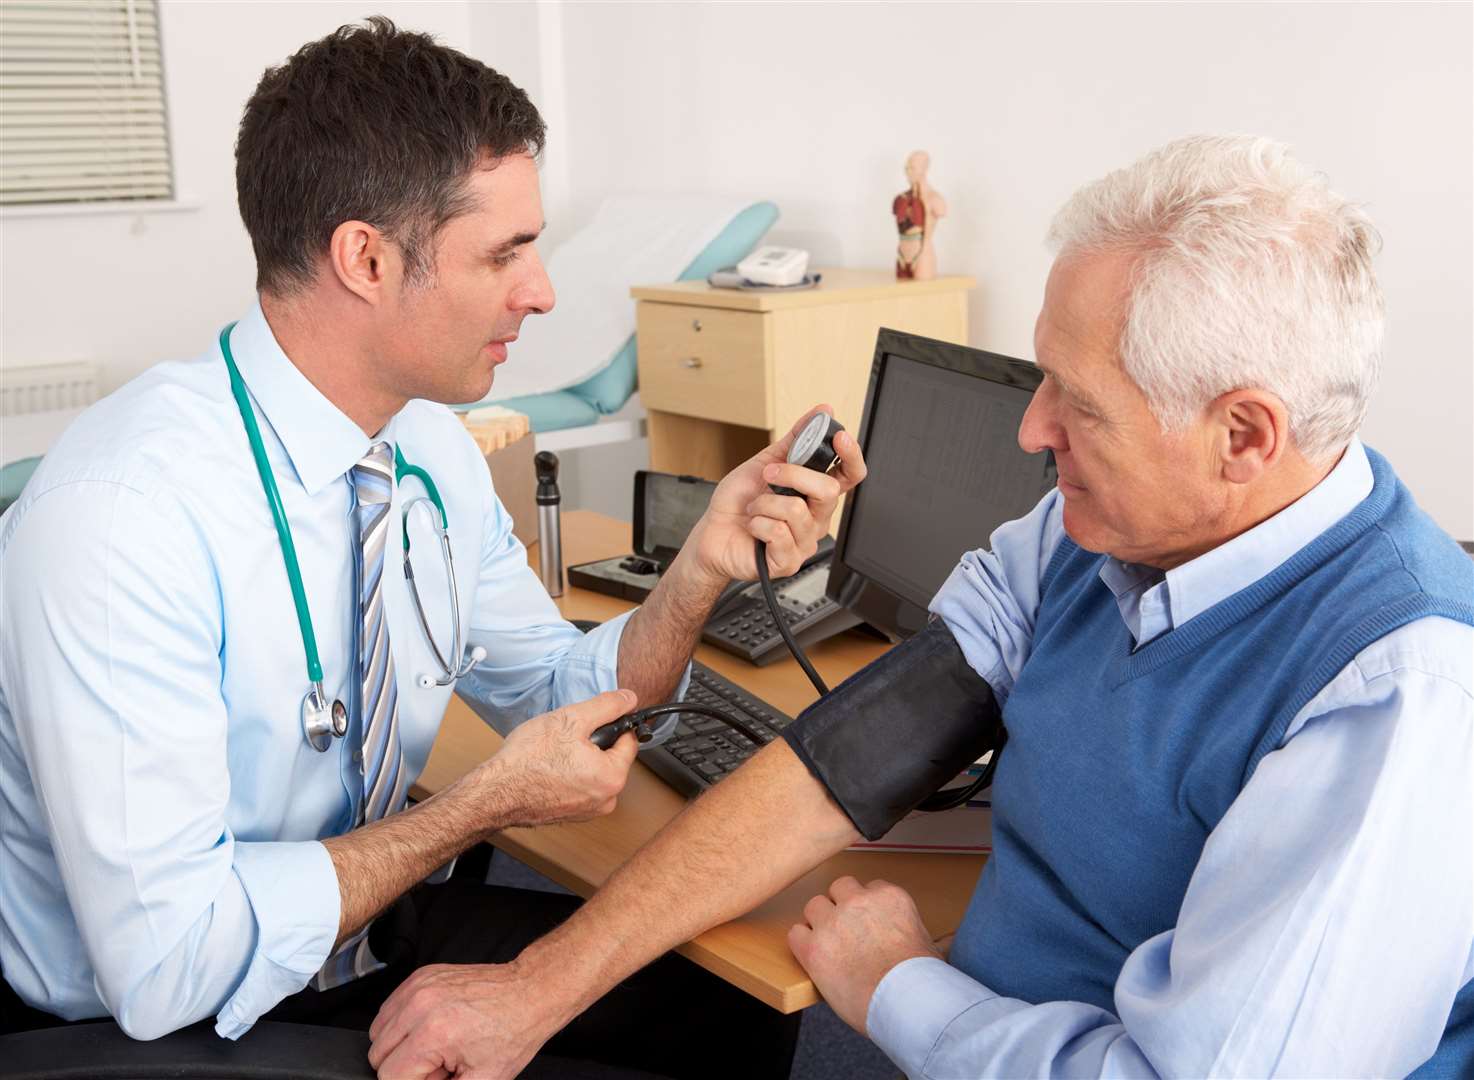 Alongside their GP, people can get a check at their pharmacy. Image: iStock.